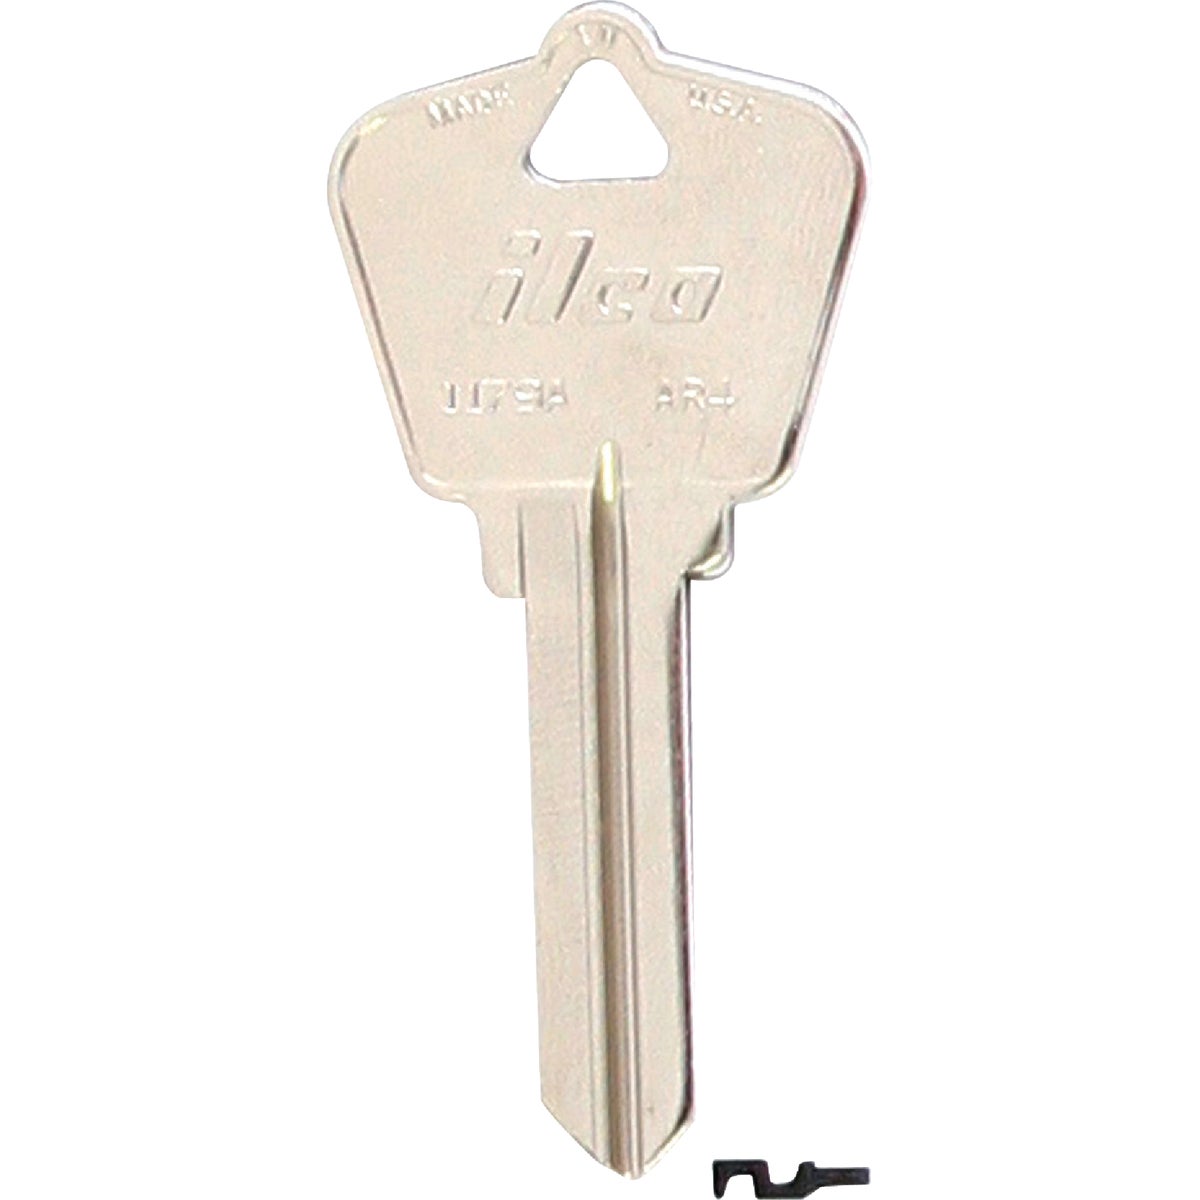 Item 228827, Nickel-plated key blank. When you order one, you will receive 10 keys.